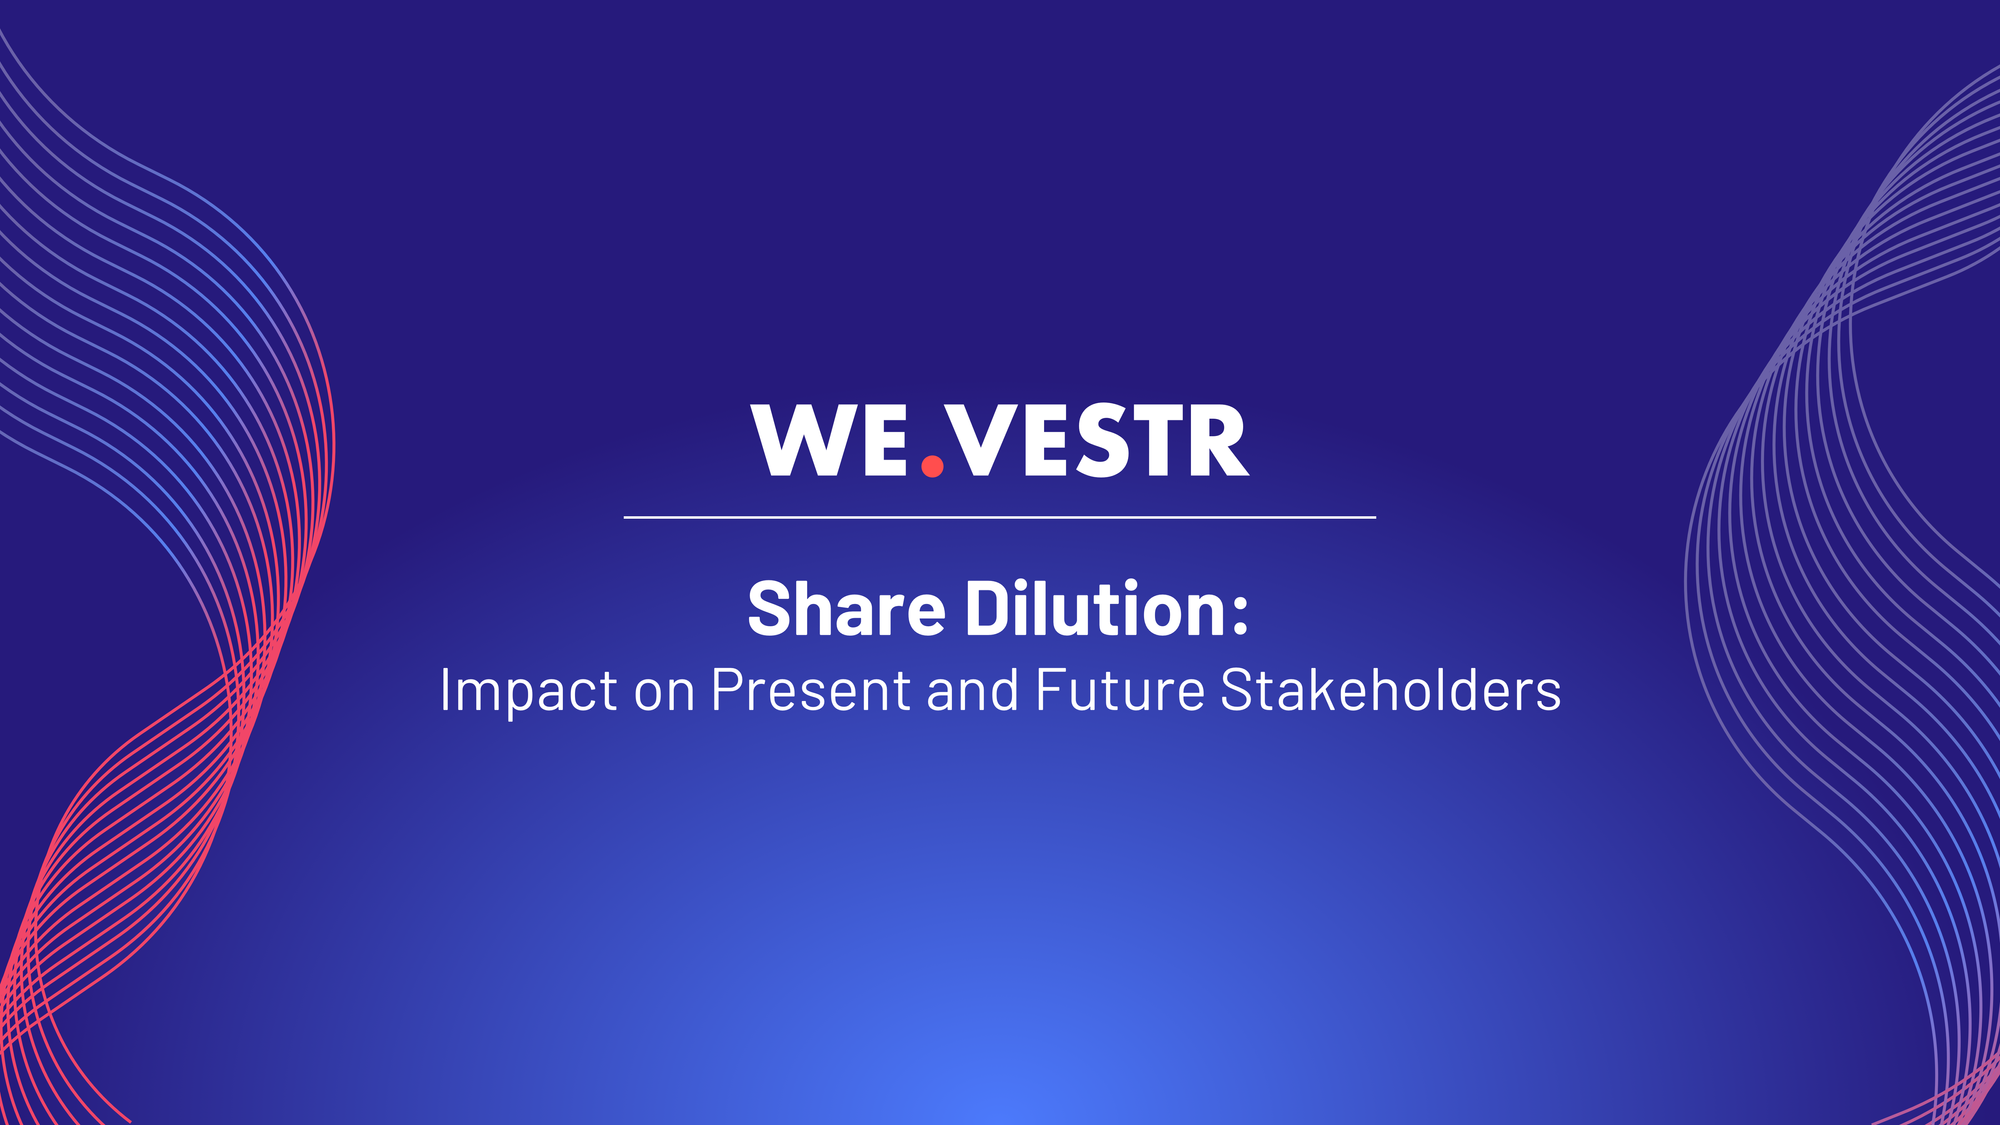 Share Dilution: Impact on Present and Future Stakeholders